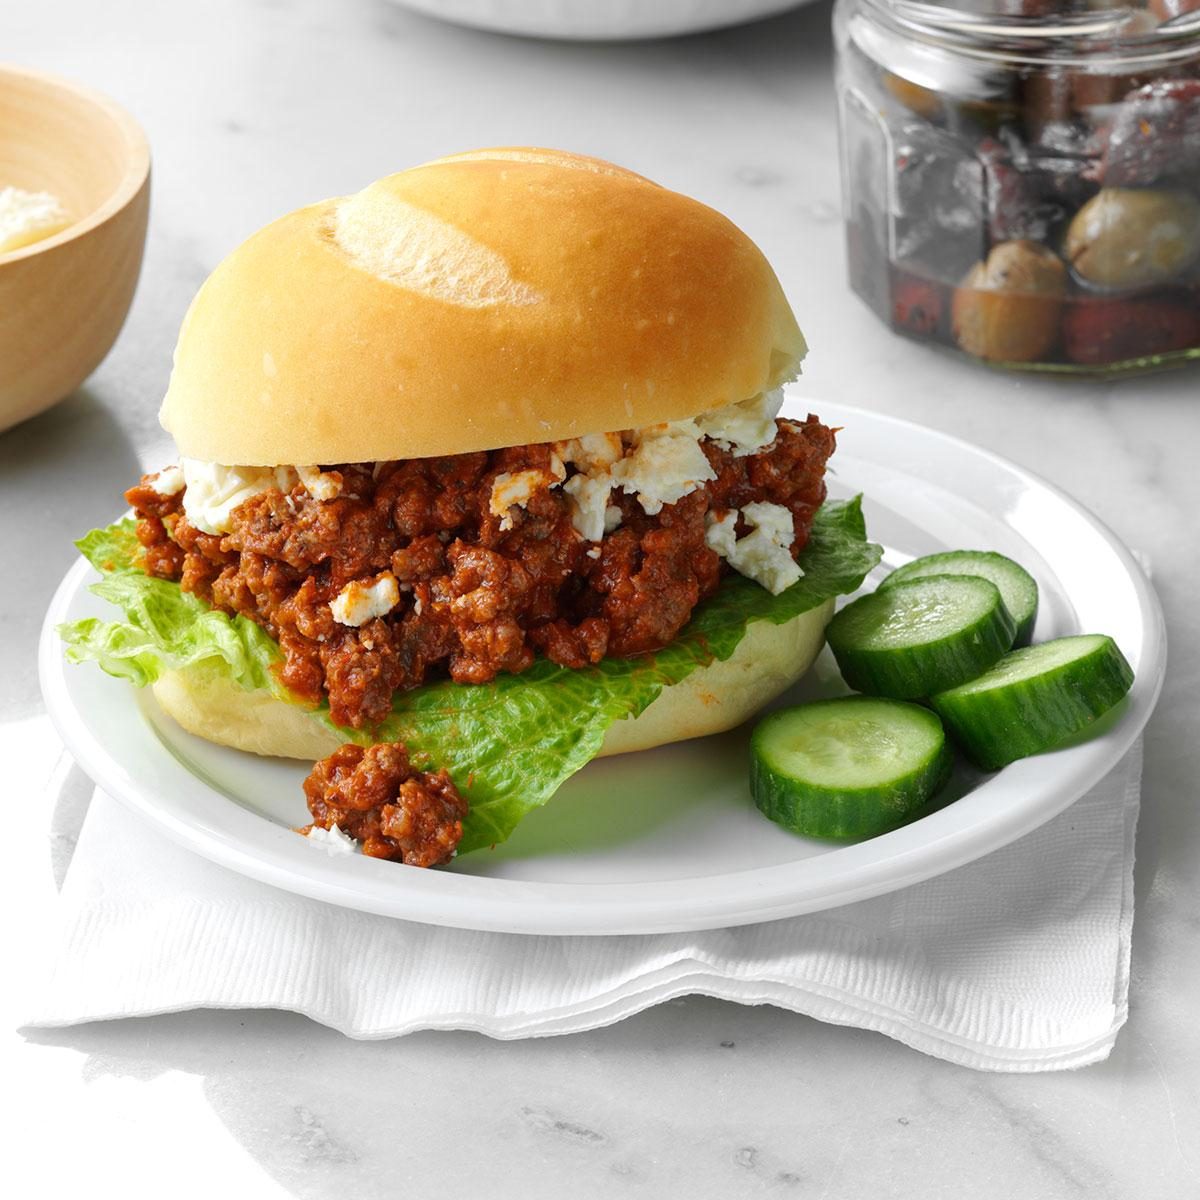 Save on Giant Sloppy Joe Sauce Order Online Delivery